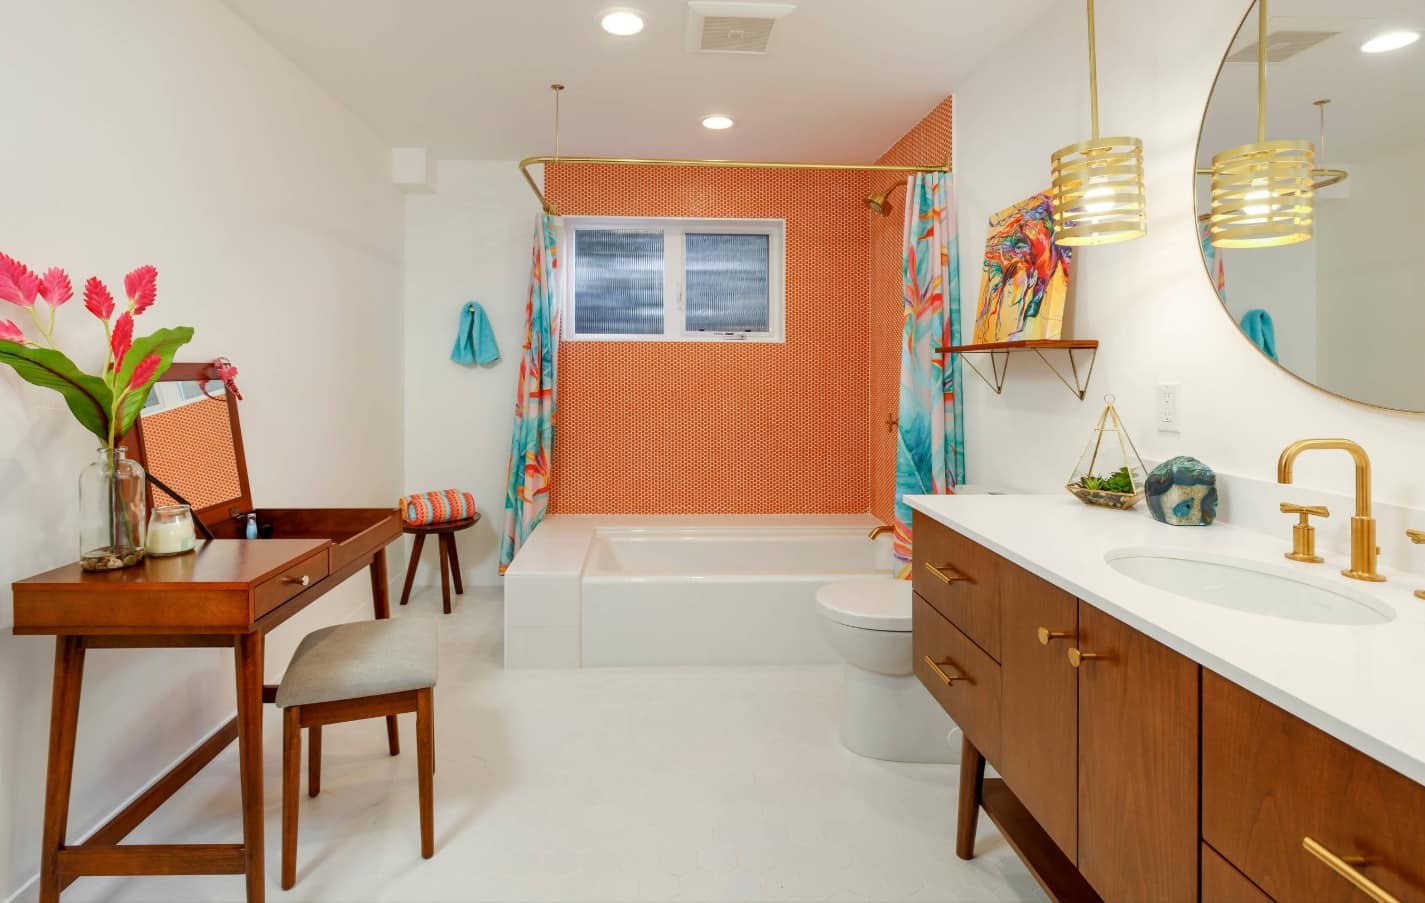 Orange back wall in the minimalistic style bathroom with simple wooden furniture and stools